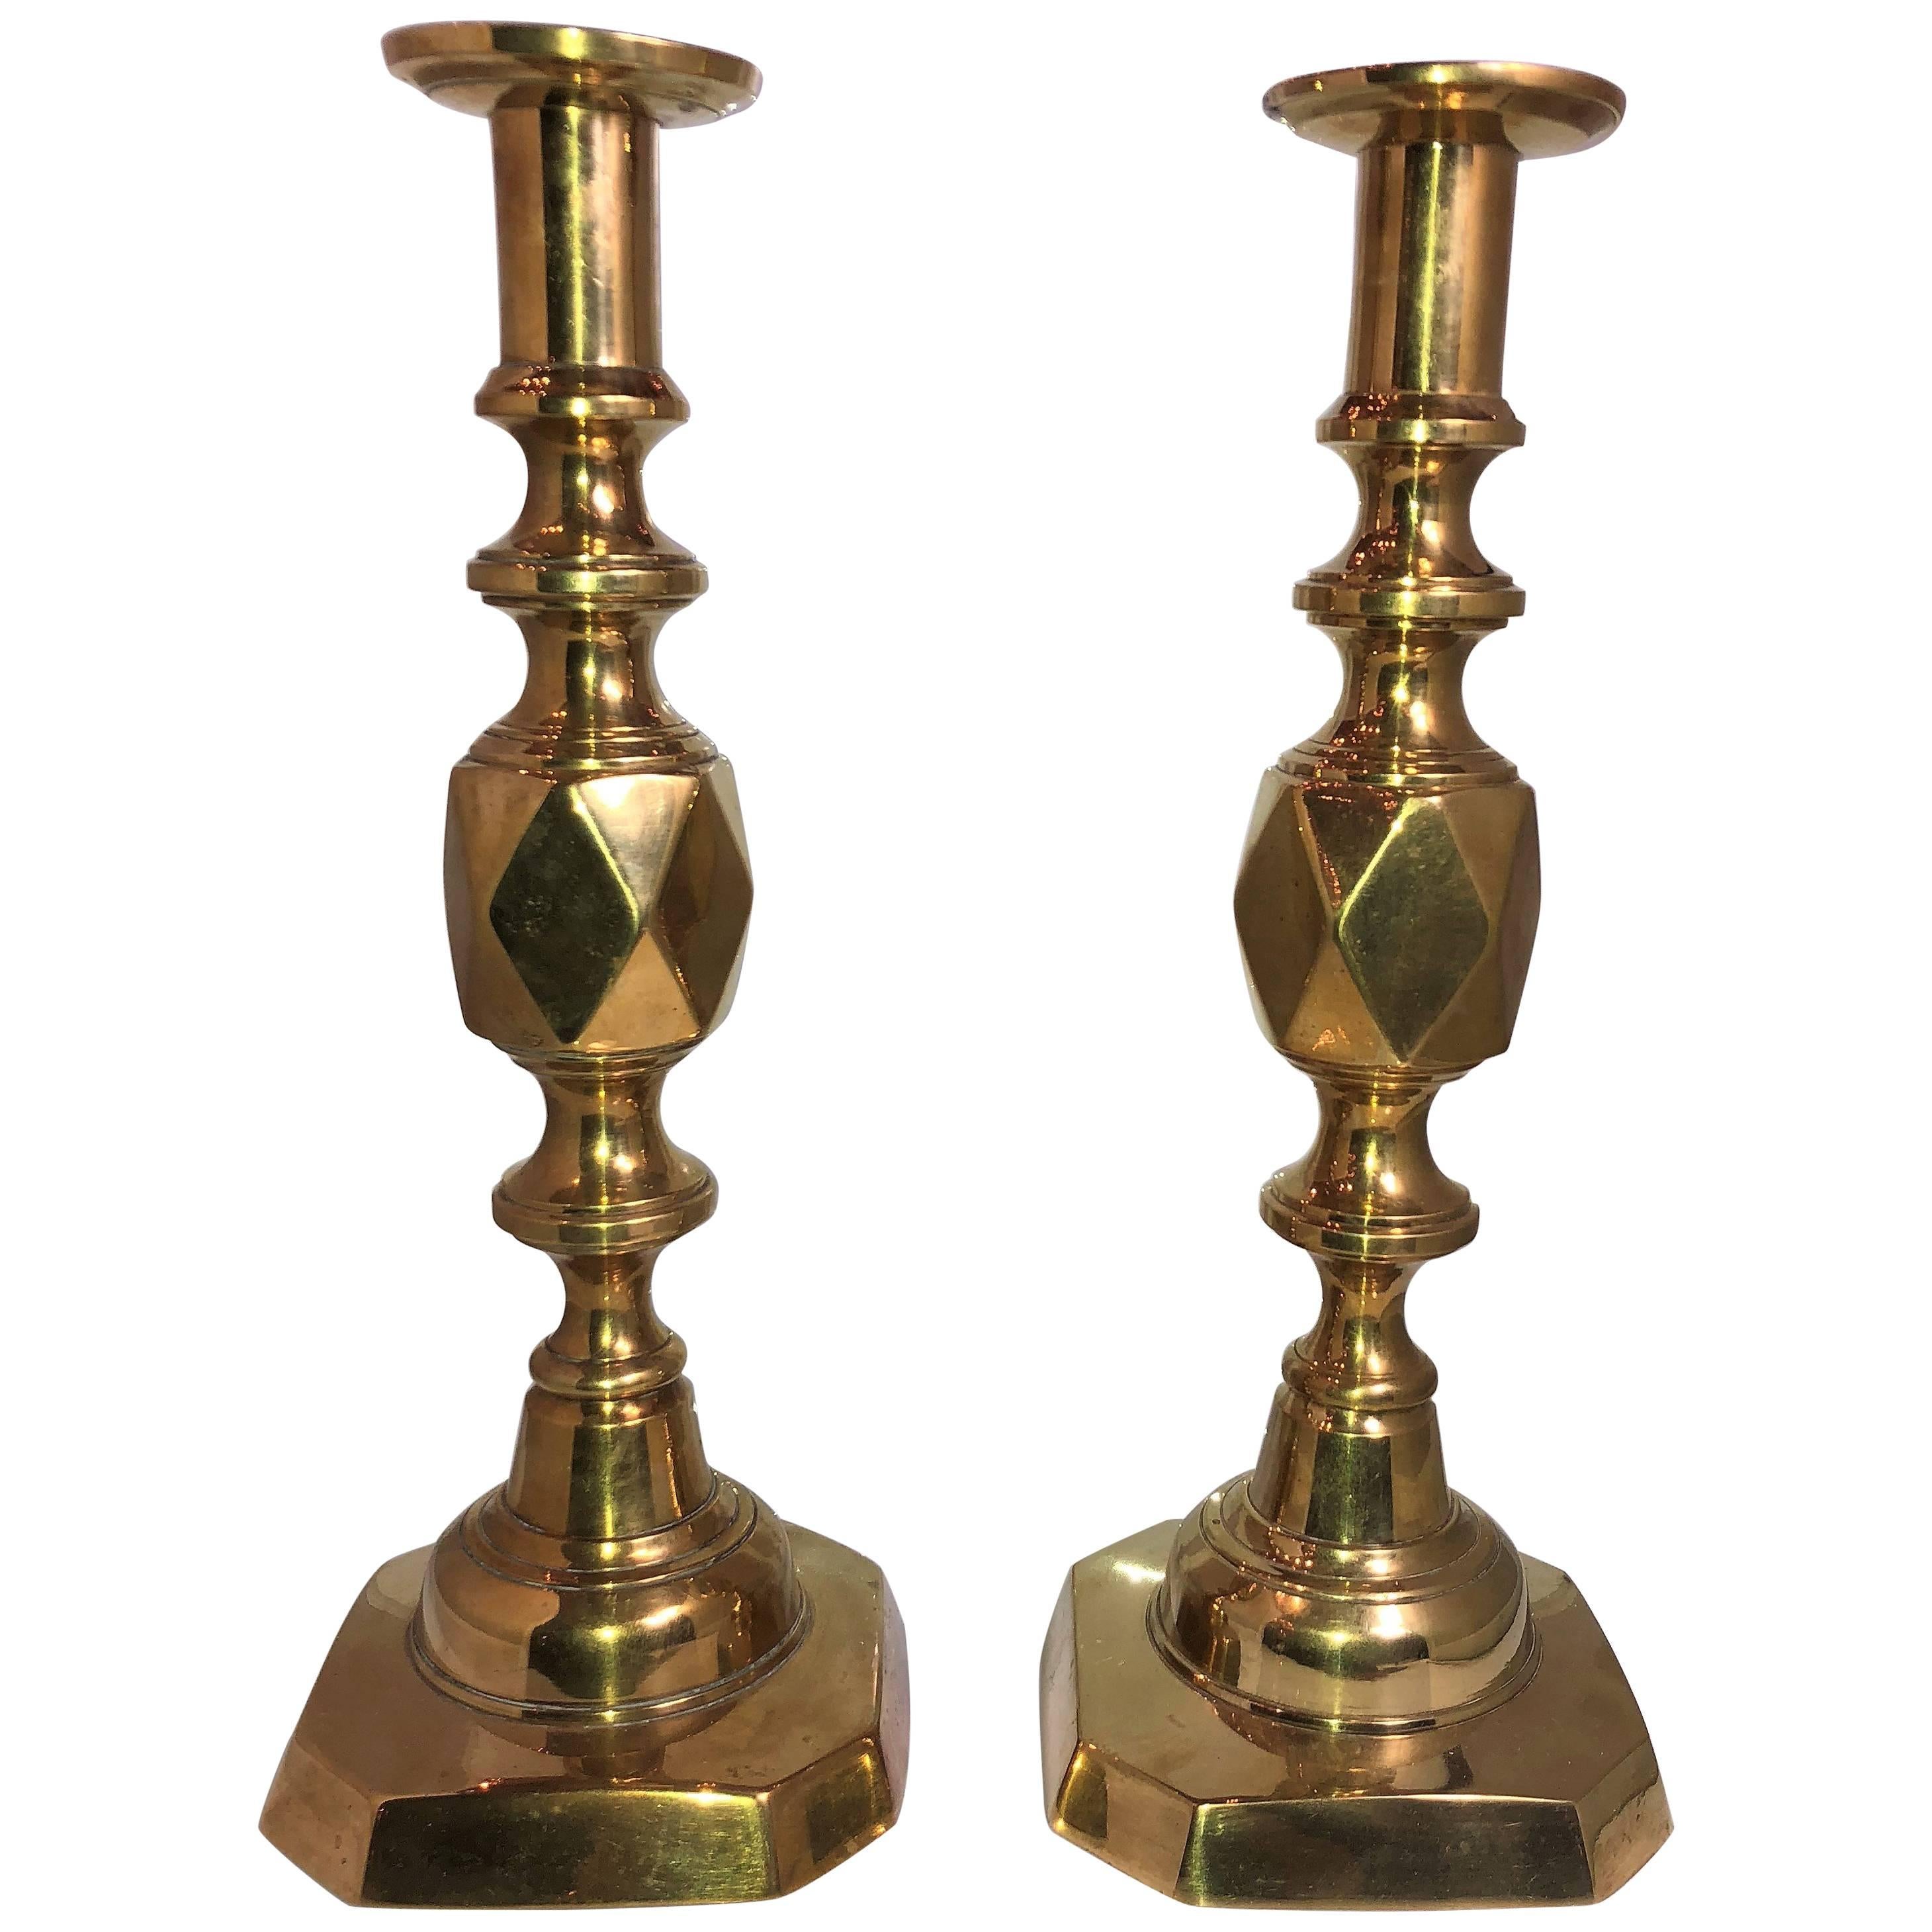 Pair of Antique English Victorian King's Pattern Candlesticks